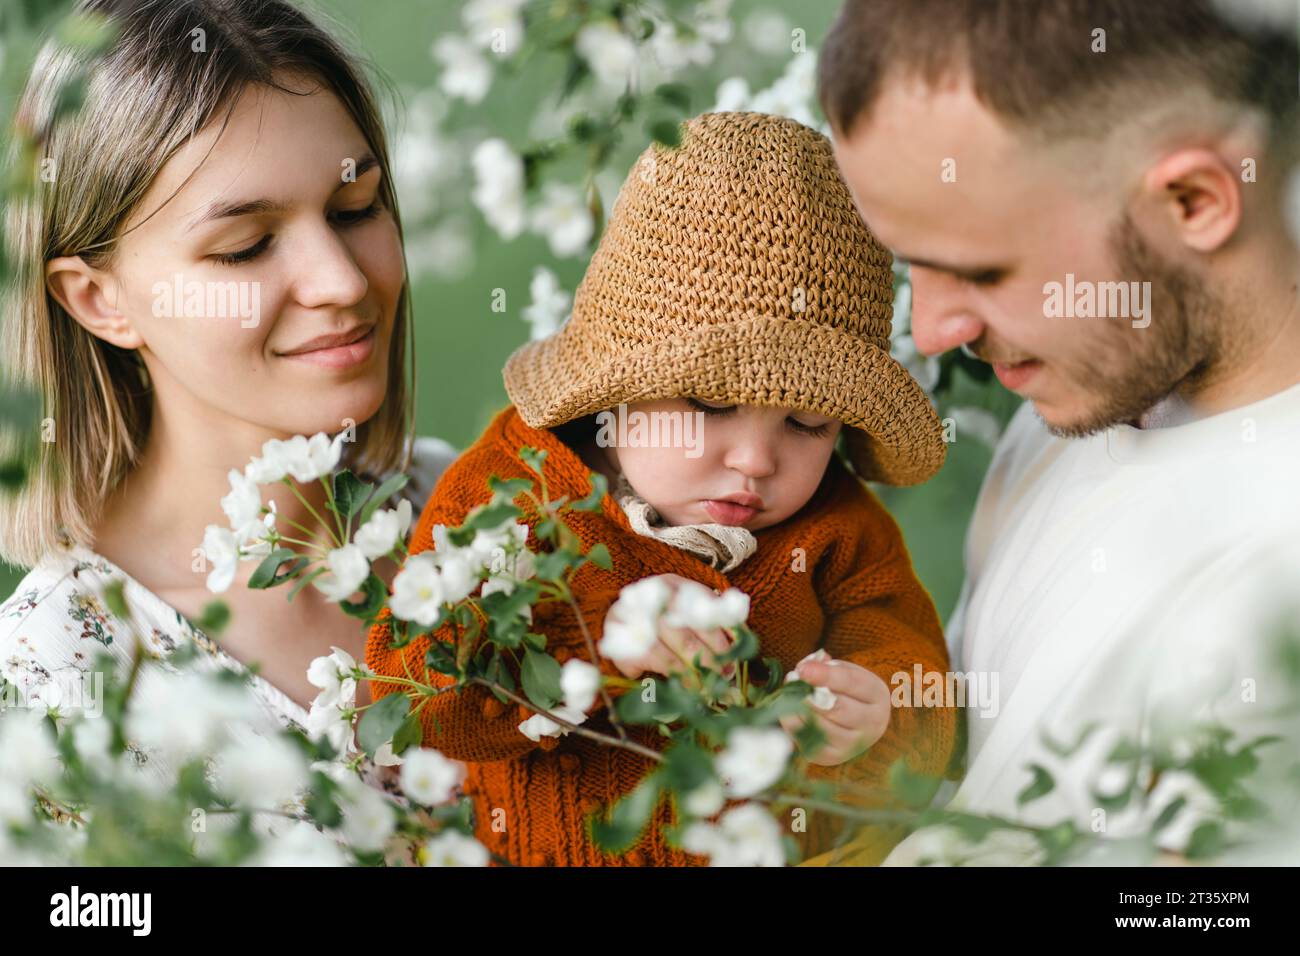 Smiling parents with child spending leisure time in garden Stock Photo